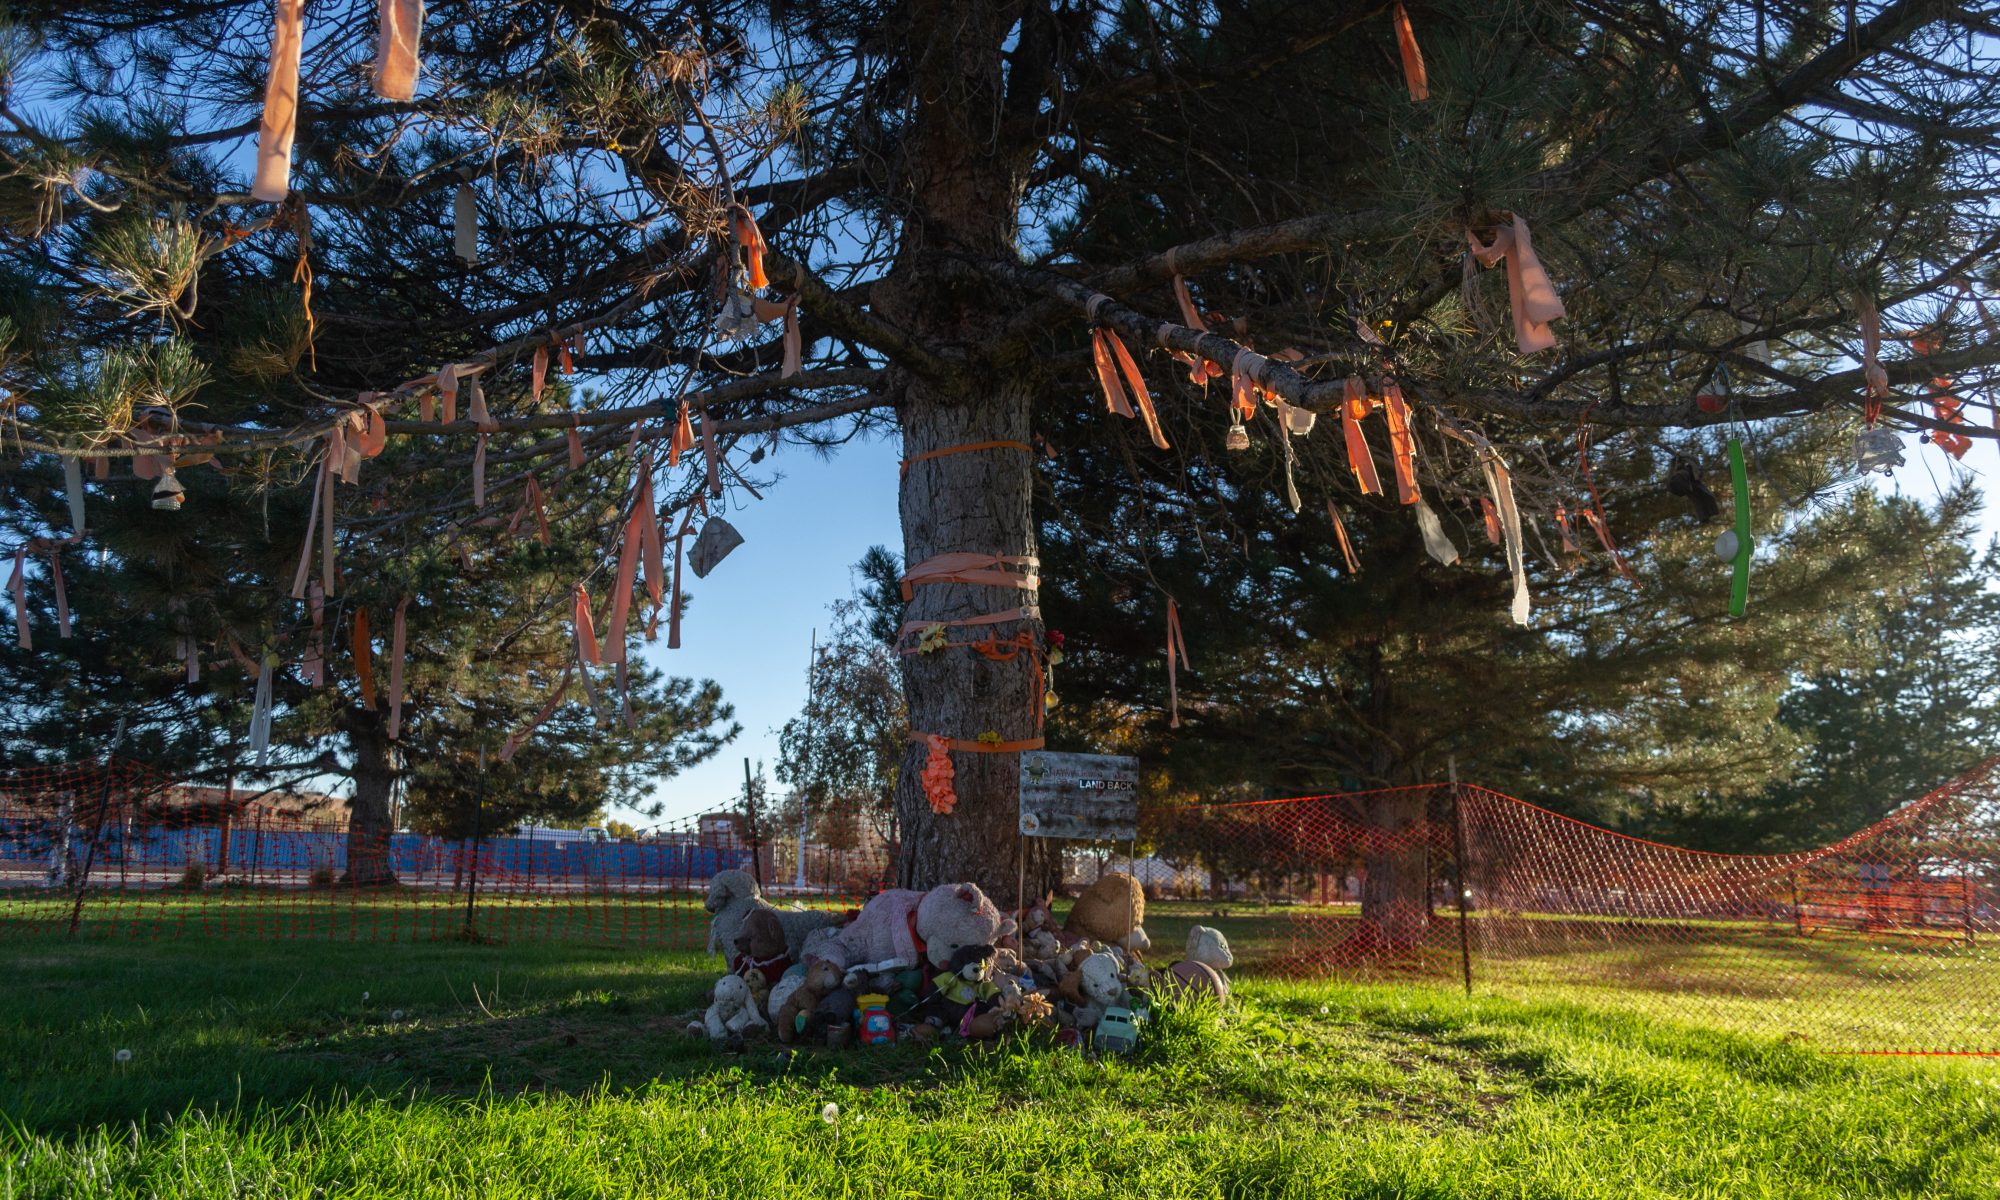 The author has taken a photo on 12 November 2023 of the site of the Albuquerque Indian School Cemetary. There are no visible graves, but we see a tree with orange ribbons attached to the branches and the trunk. Teddy bears have been placed around the foot of the tree.